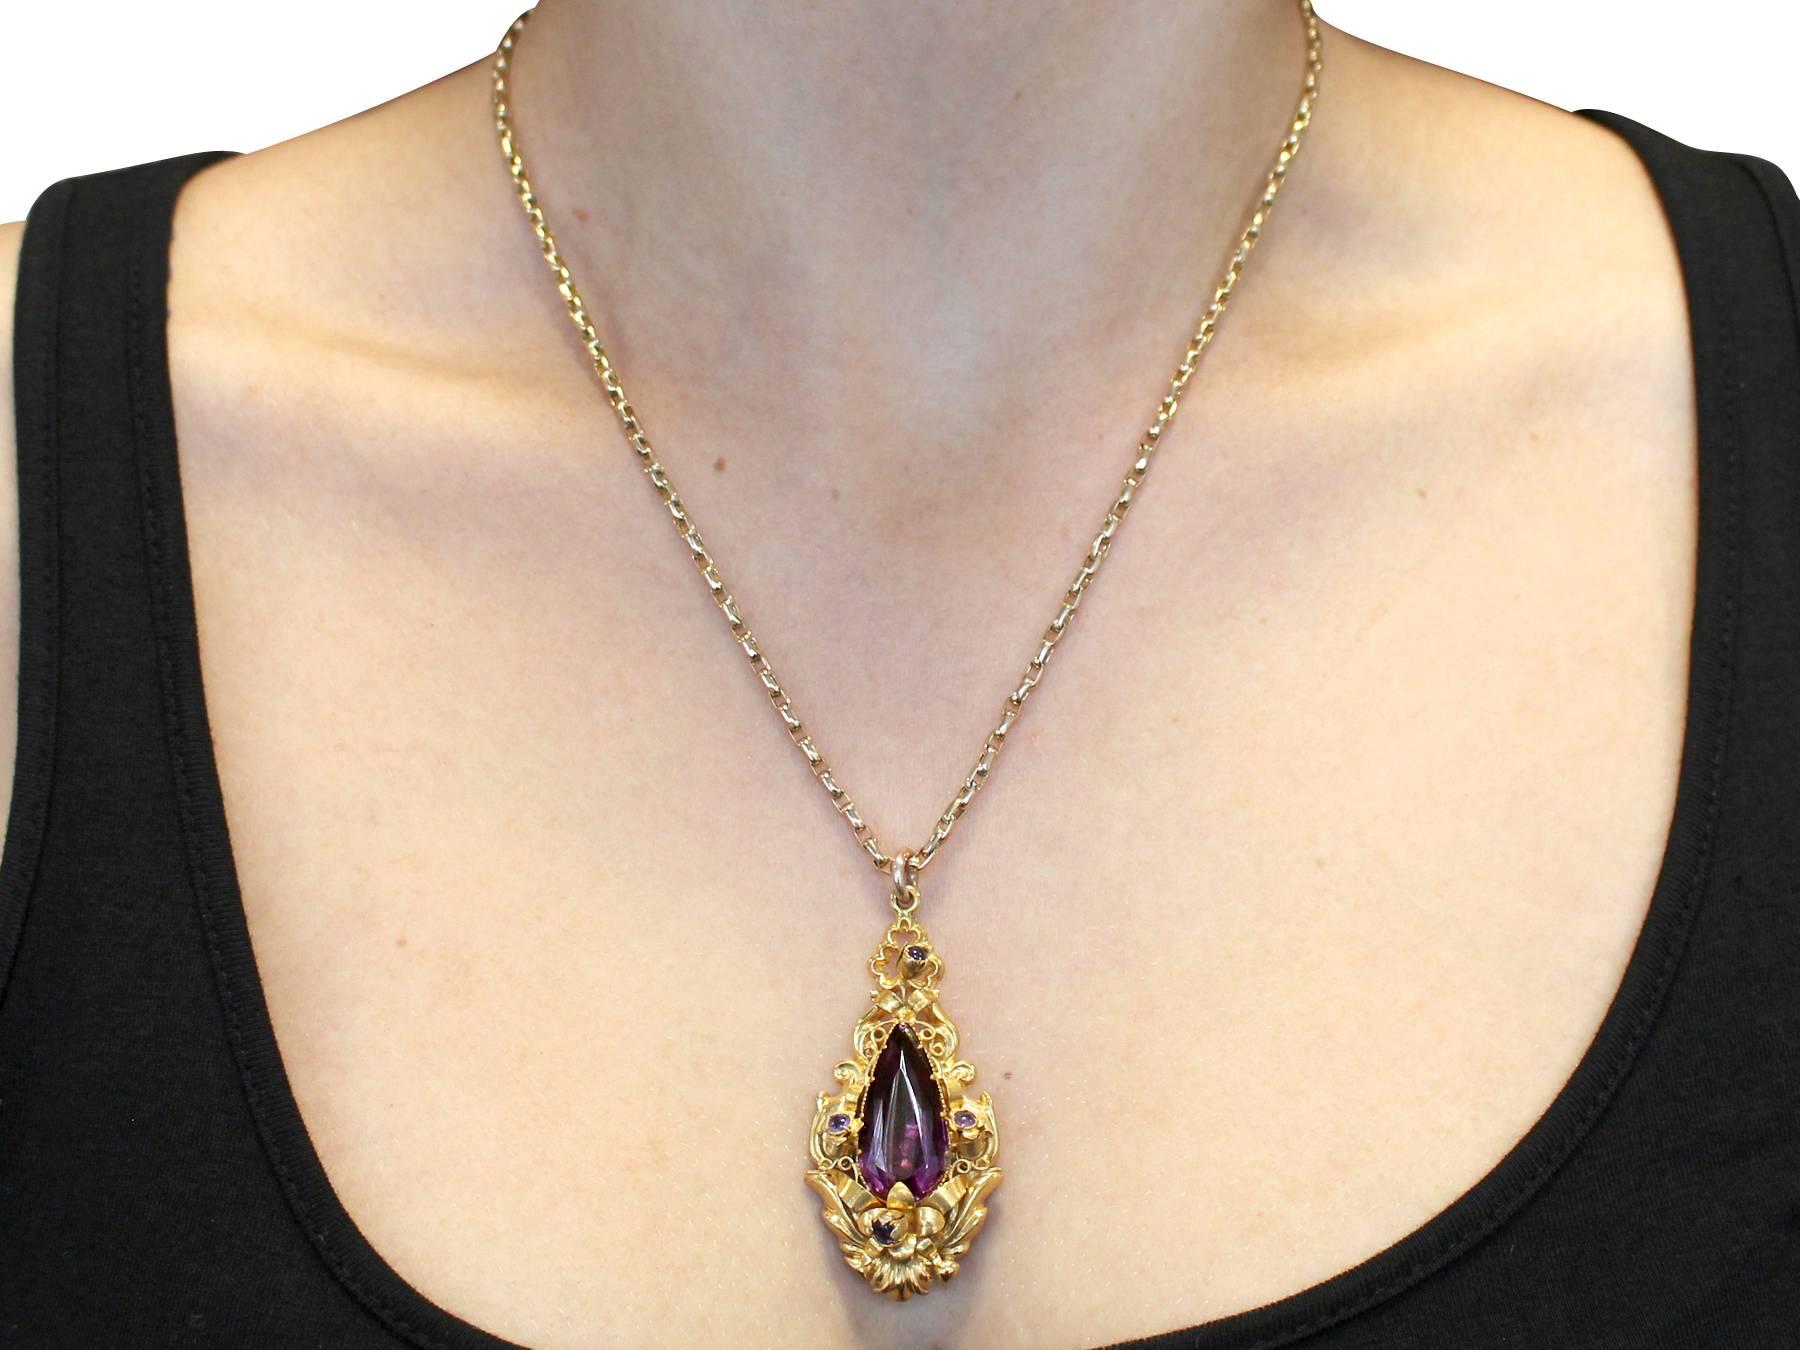 1880s Antique 13.30 Carat Amethyst and Yellow Gold Pendant 4